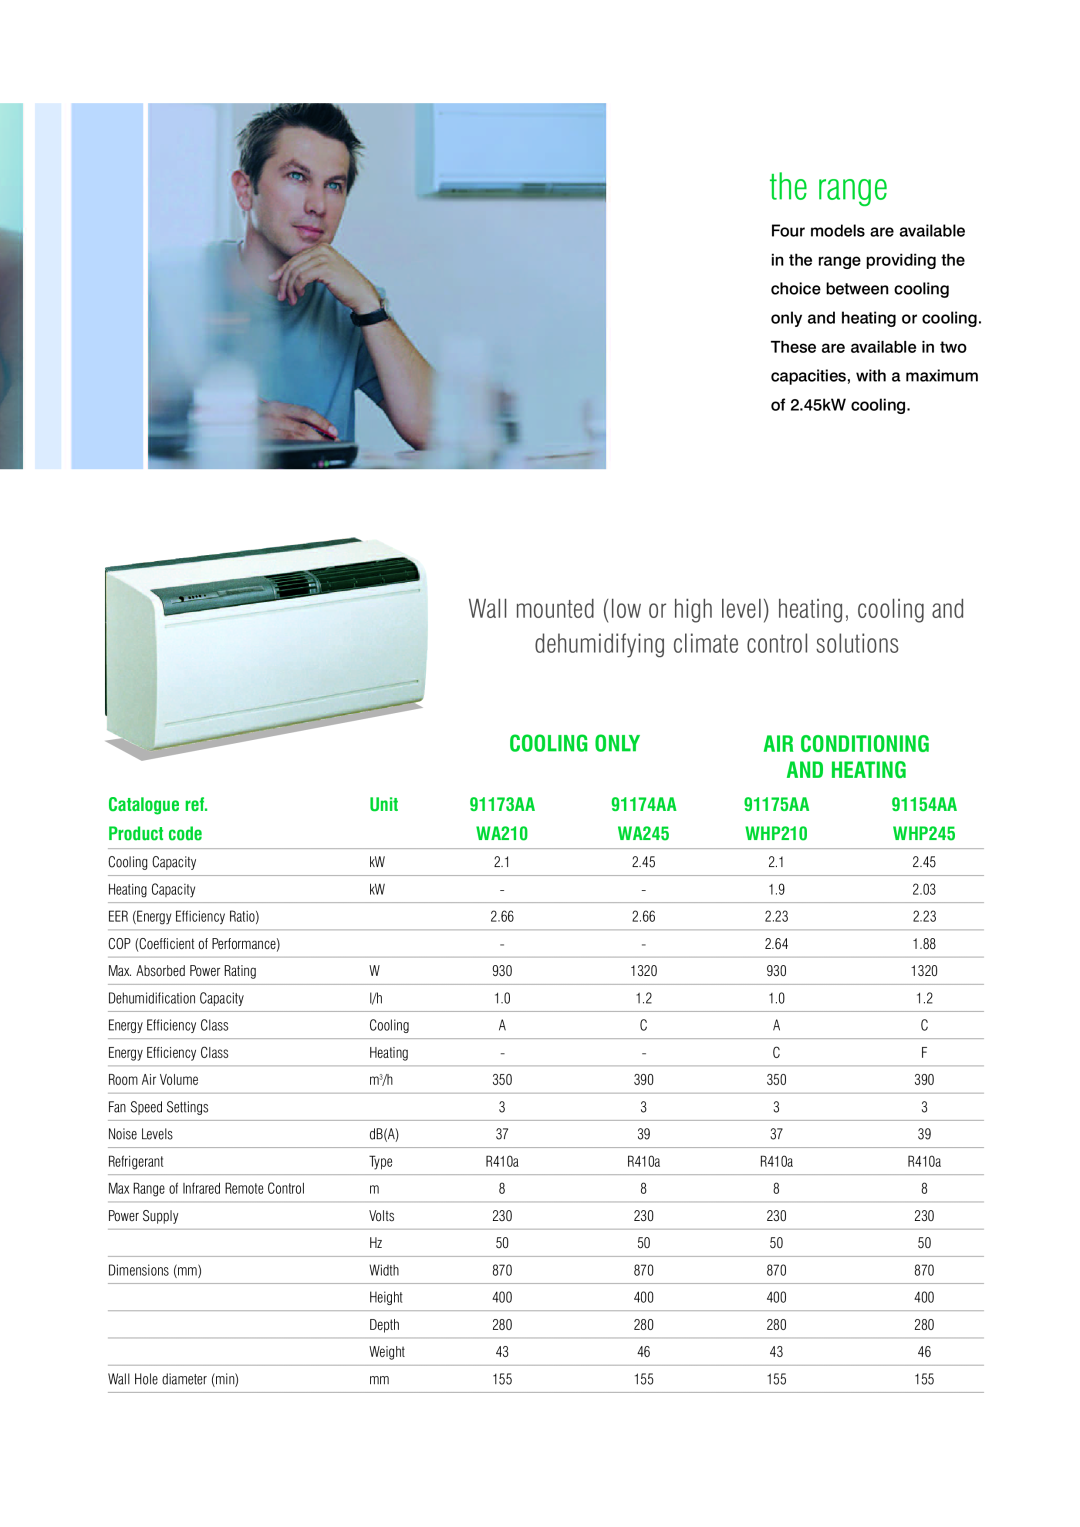 Xpelair Digitemp the range, dehumidifying climate control solutions, Cooling Only, Air Conditioning, And Heating, Unit 